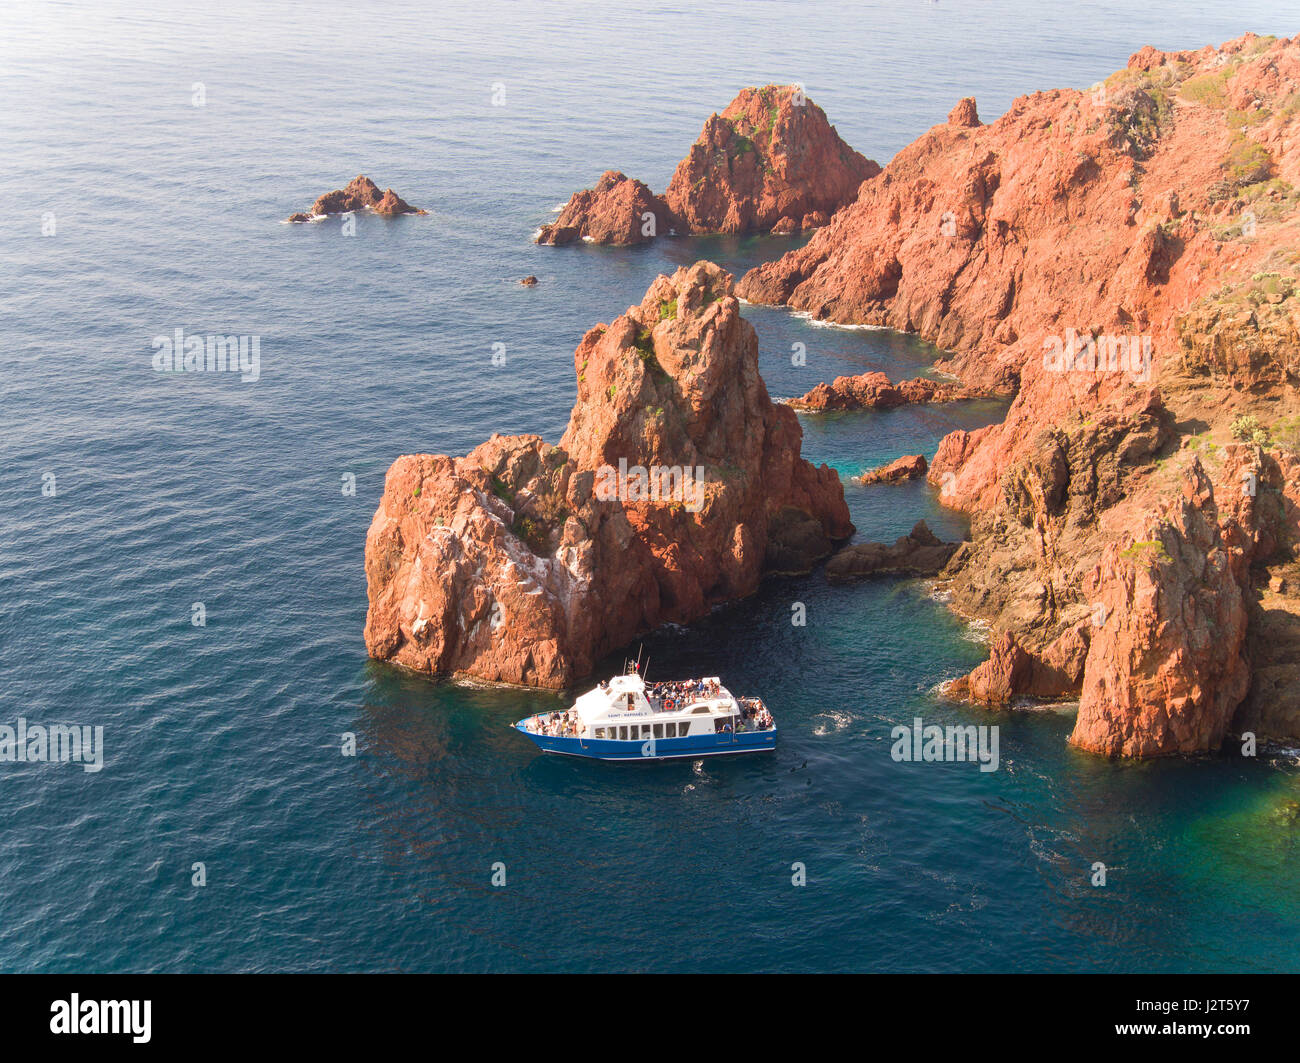 AERIAL VIEW. Tourists on a sightseeing boat admiring the spectacular red rock of Cap du Dramont. Saint-Raphël, Var, French Riviera, France. Stock Photo